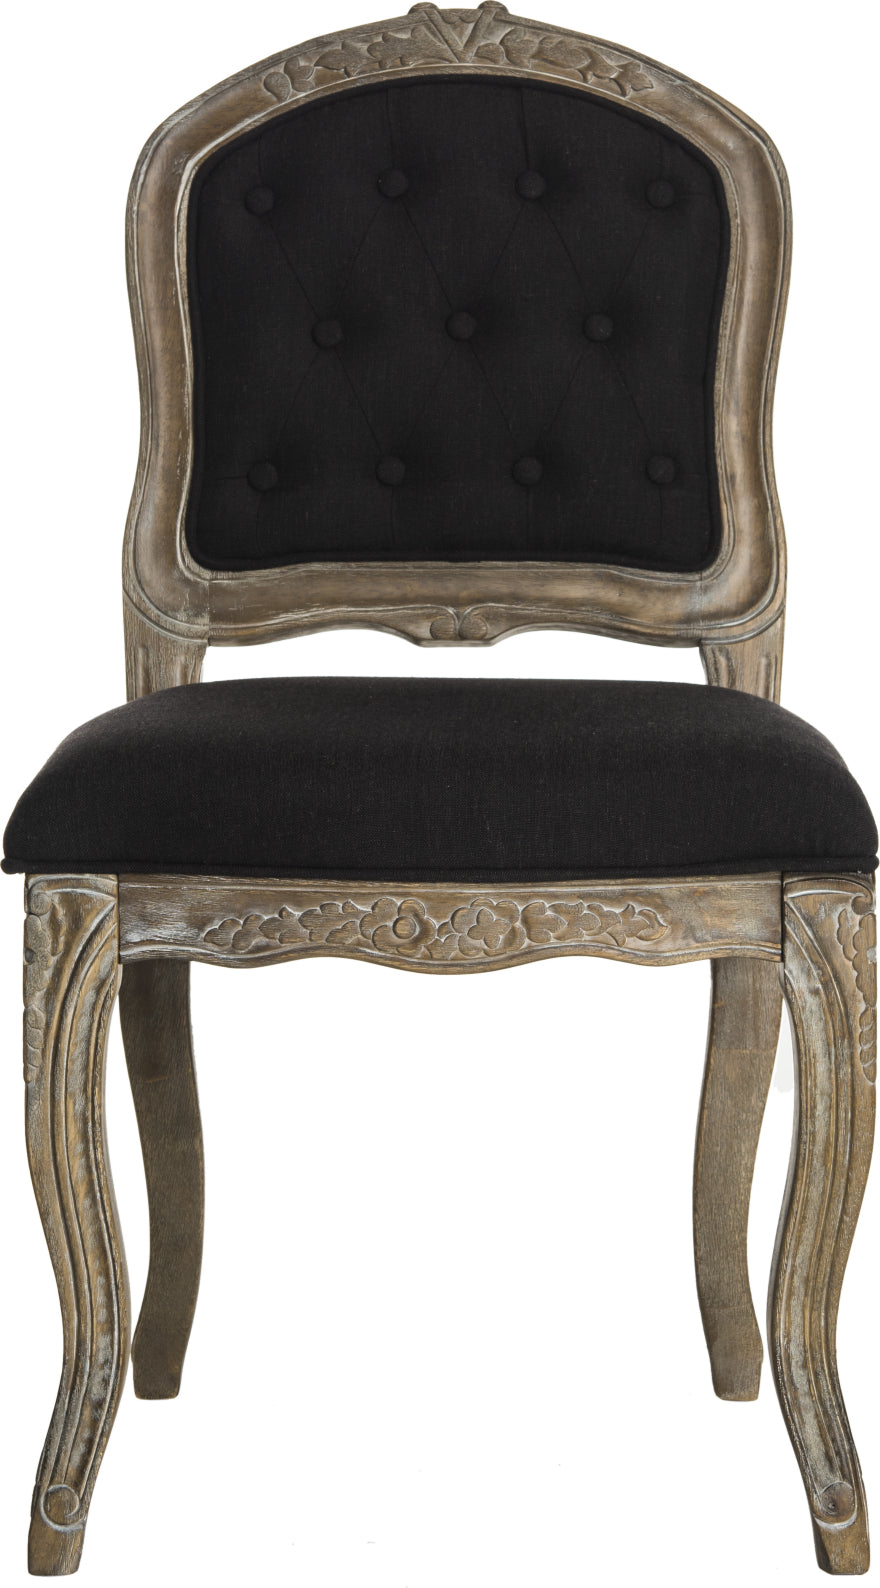 Safavieh Eloise 20''H French Leg Dining Chair Black and Rustic Oak Furniture main image